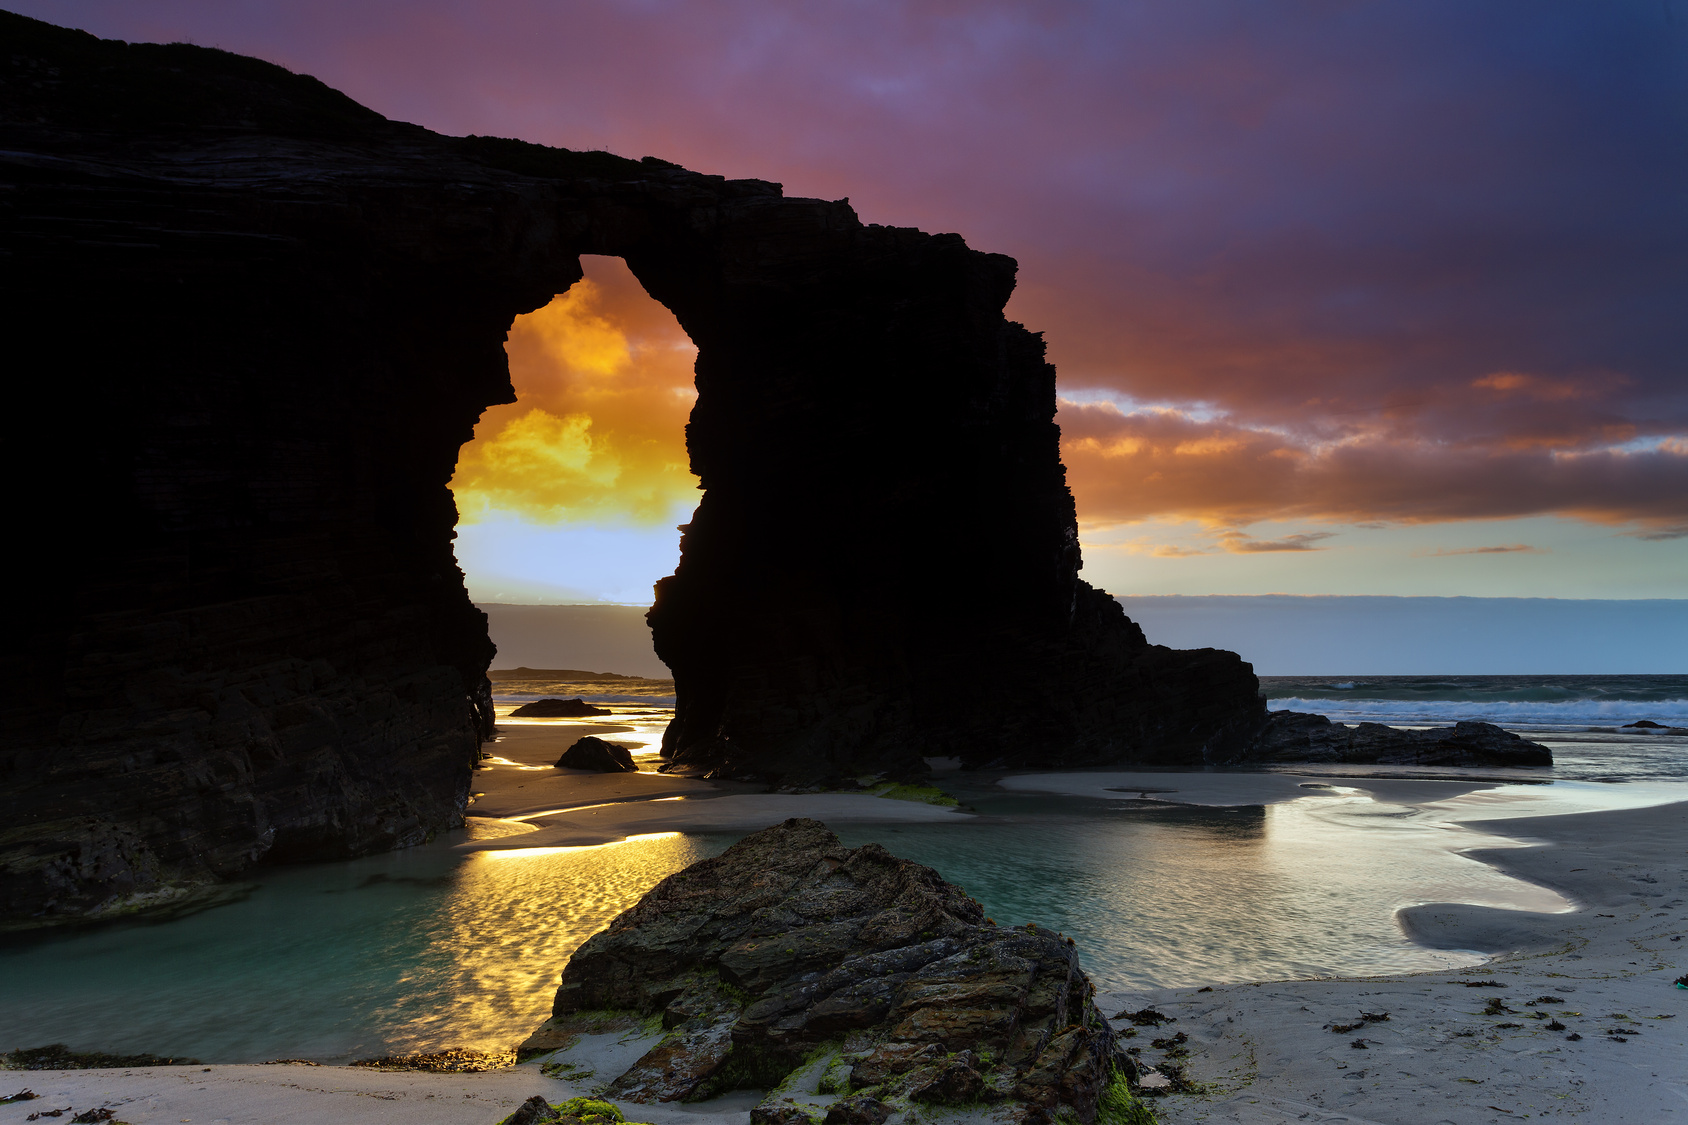 " The Cathedrals" beach. Ribadeo,Galicia. Spain.